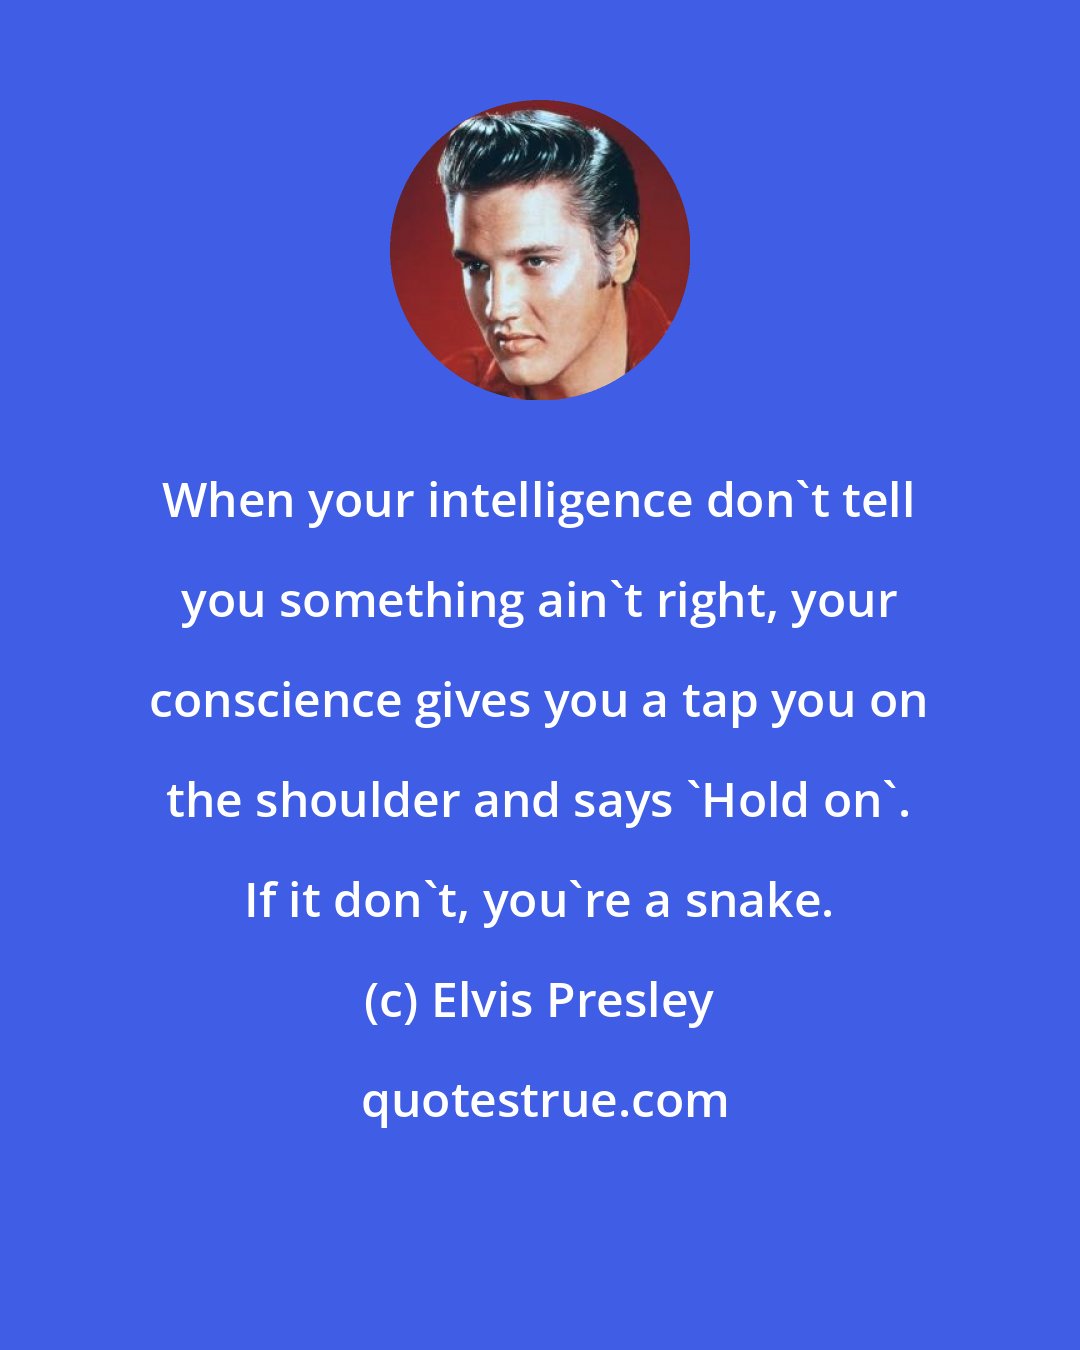 Elvis Presley: When your intelligence don't tell you something ain't right, your conscience gives you a tap you on the shoulder and says 'Hold on'. If it don't, you're a snake.